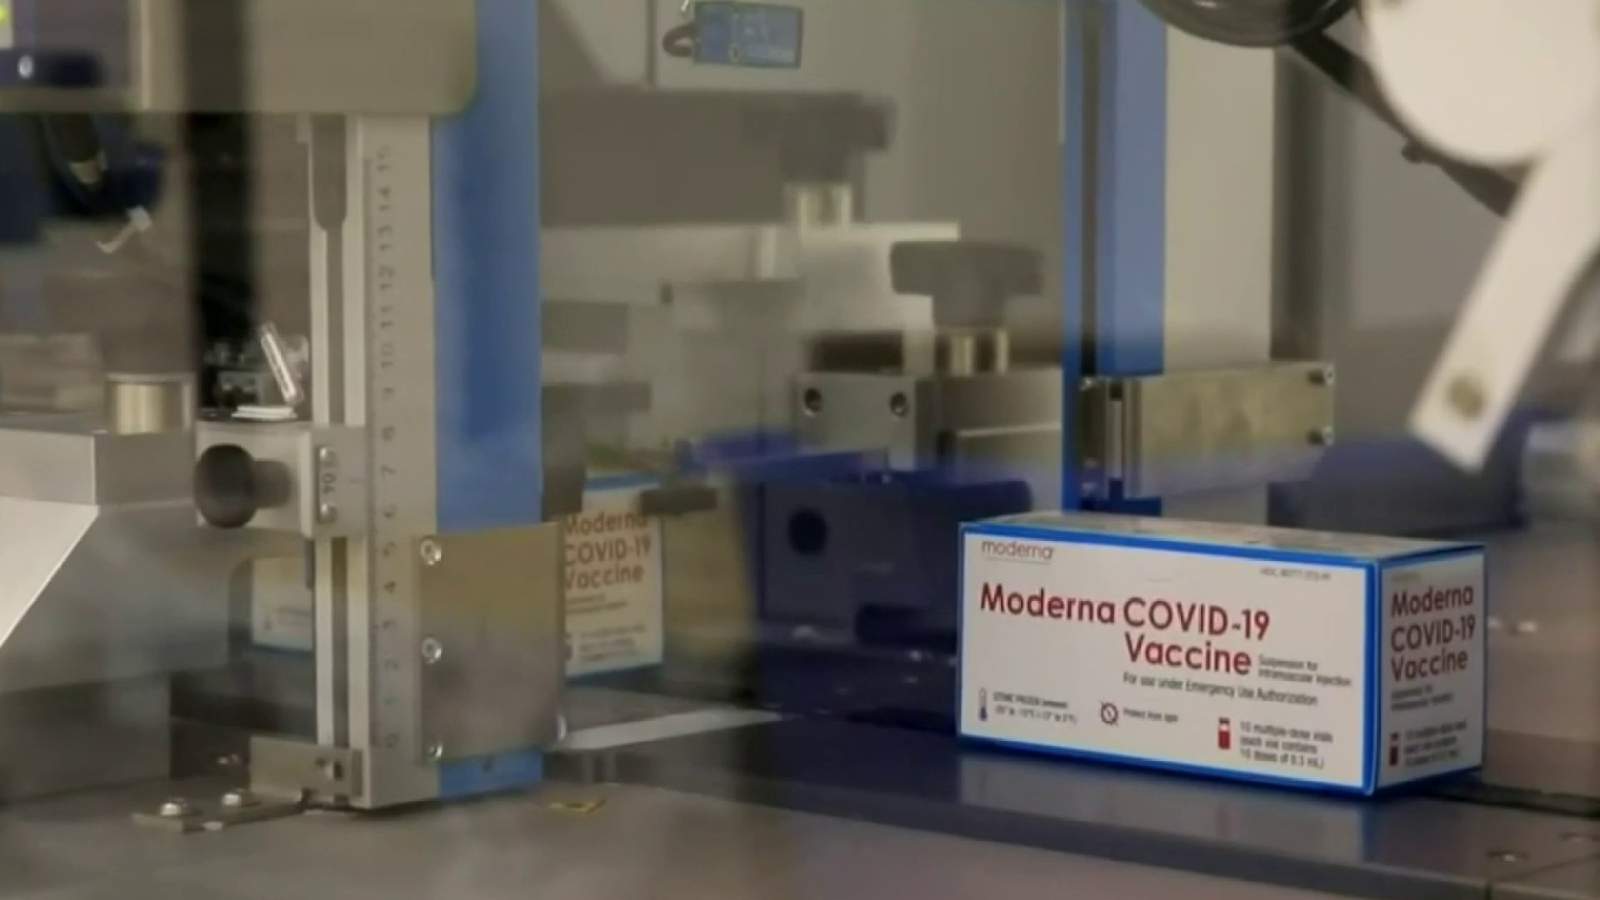 Nearly 12K doses of Moderna COVID-19 vaccine ruined en route to Michigan, state officials say